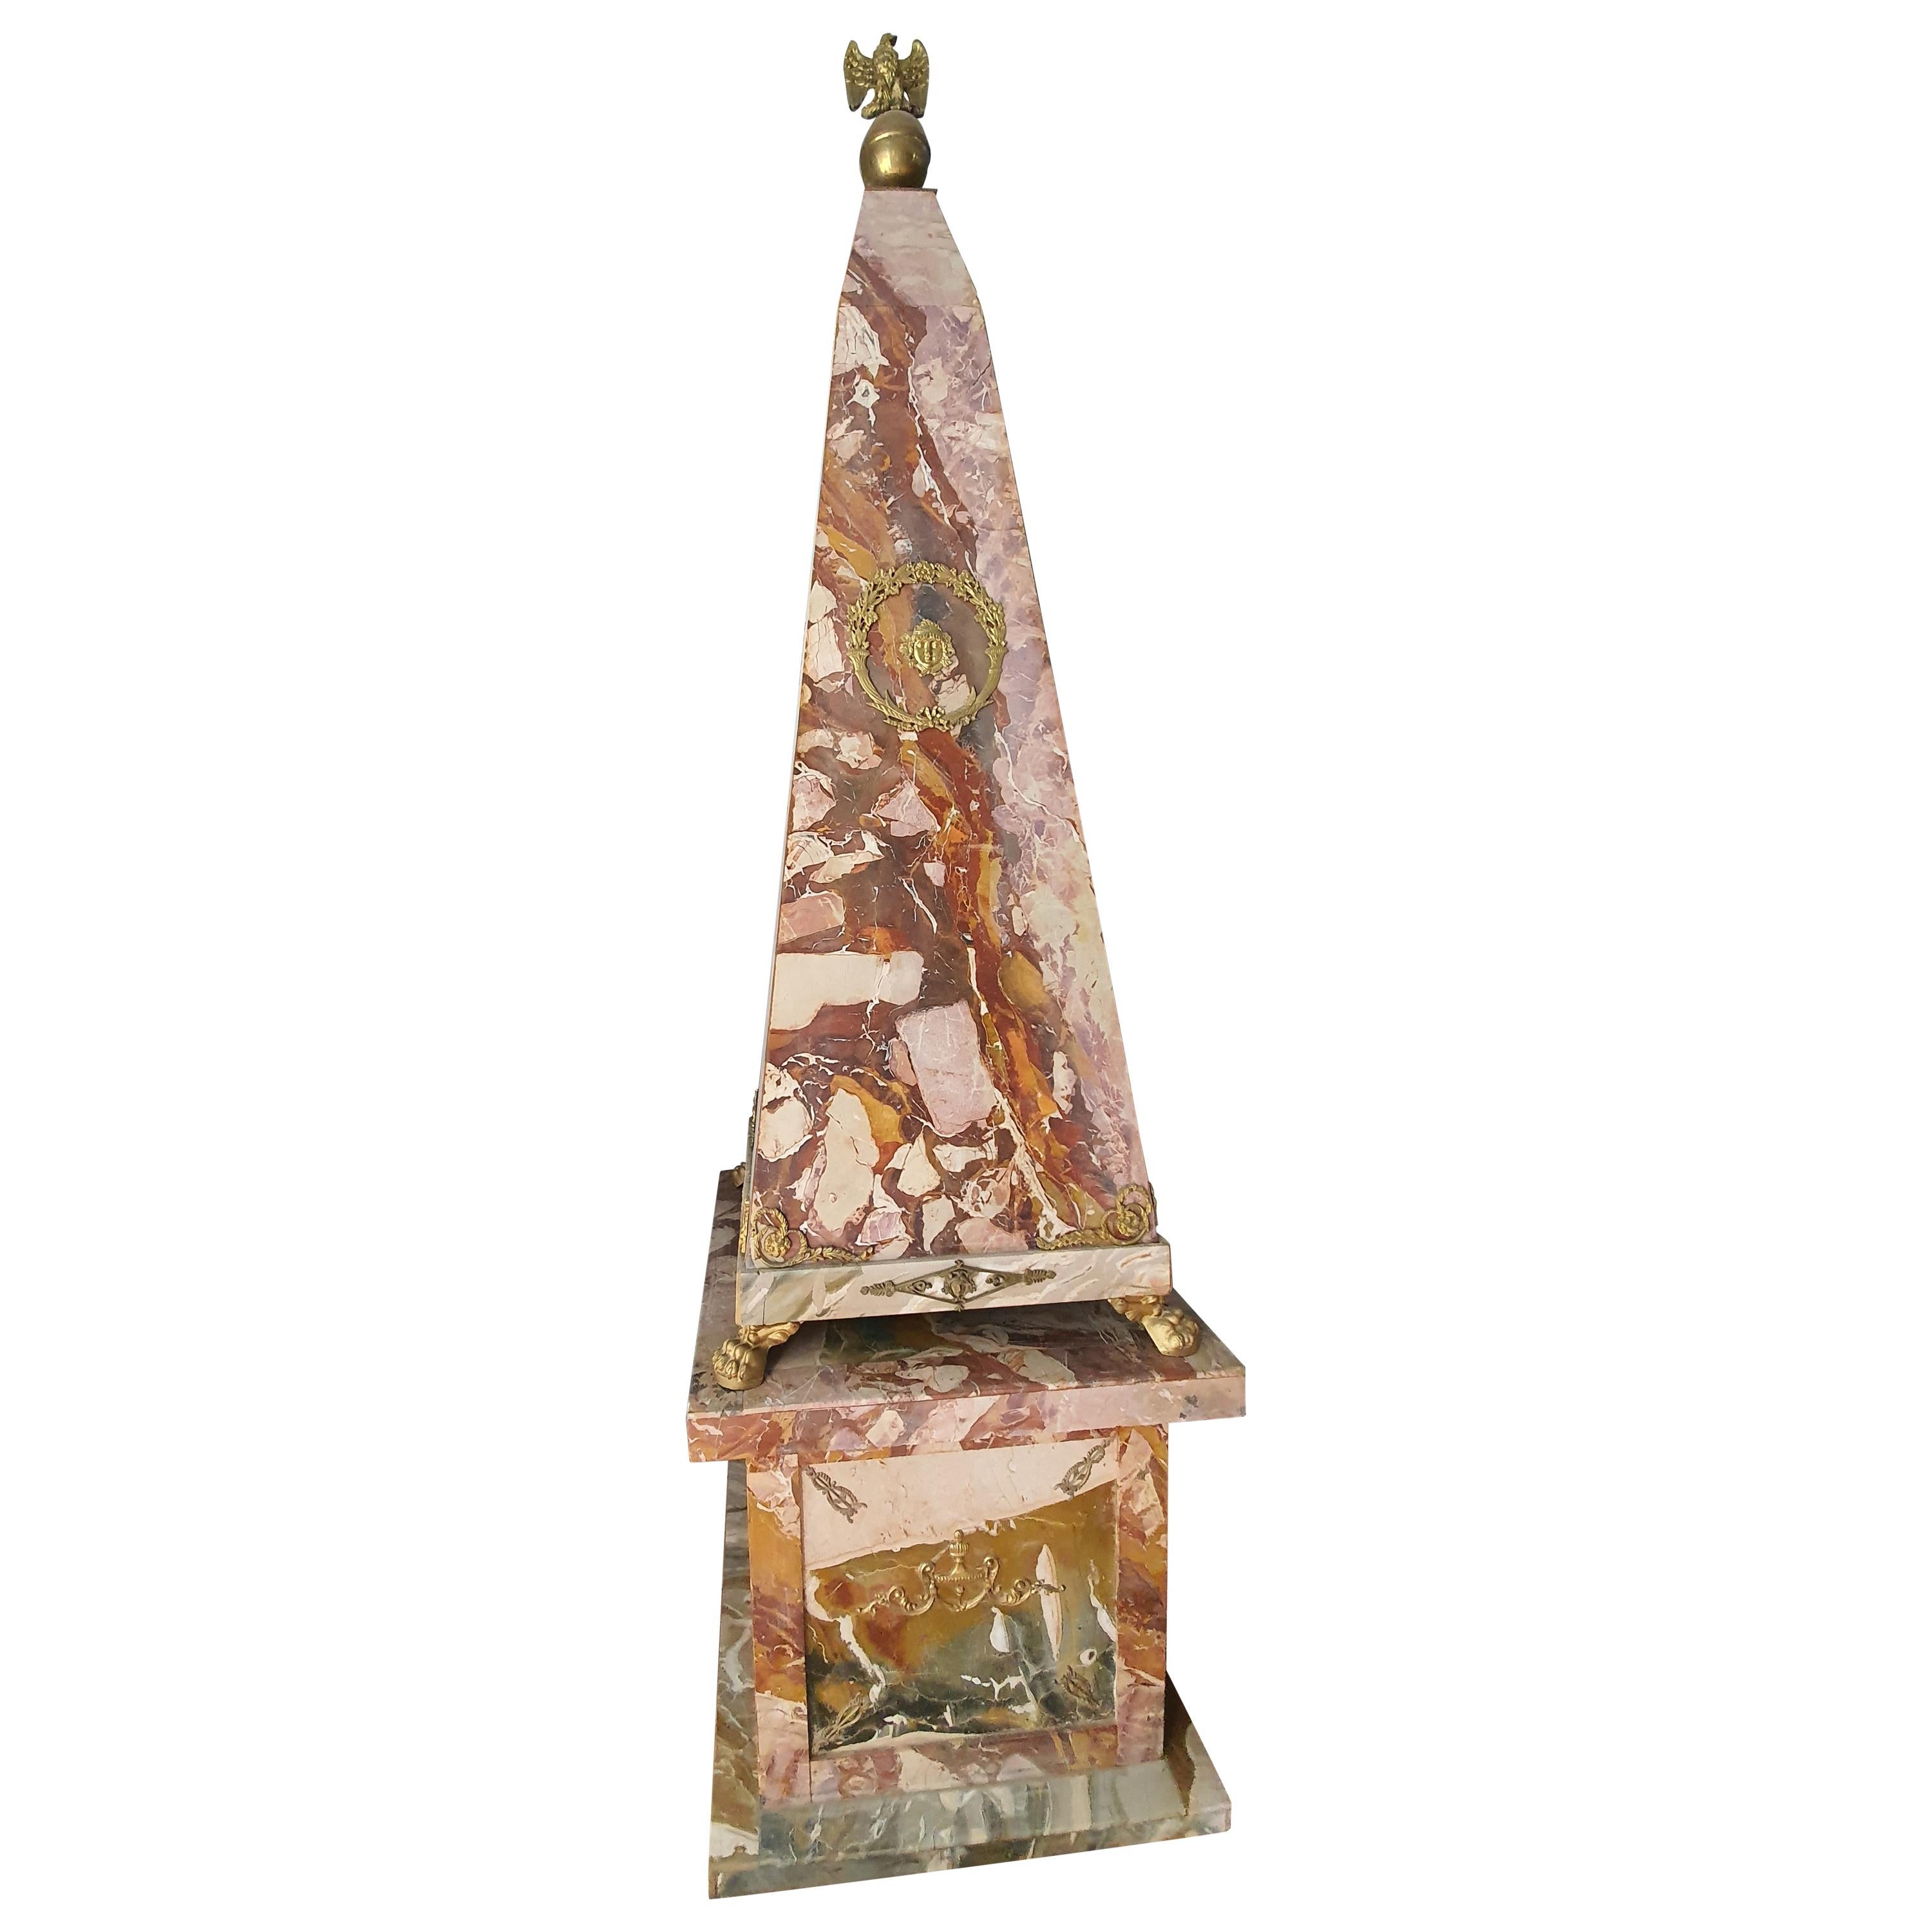 Rare pair of large obelisks entirely veneered in Sicilian open scrub jasper. Gilt bronze applications adorn the all-round obelisks. In the upper part two eagles in gilded bronze dominate.